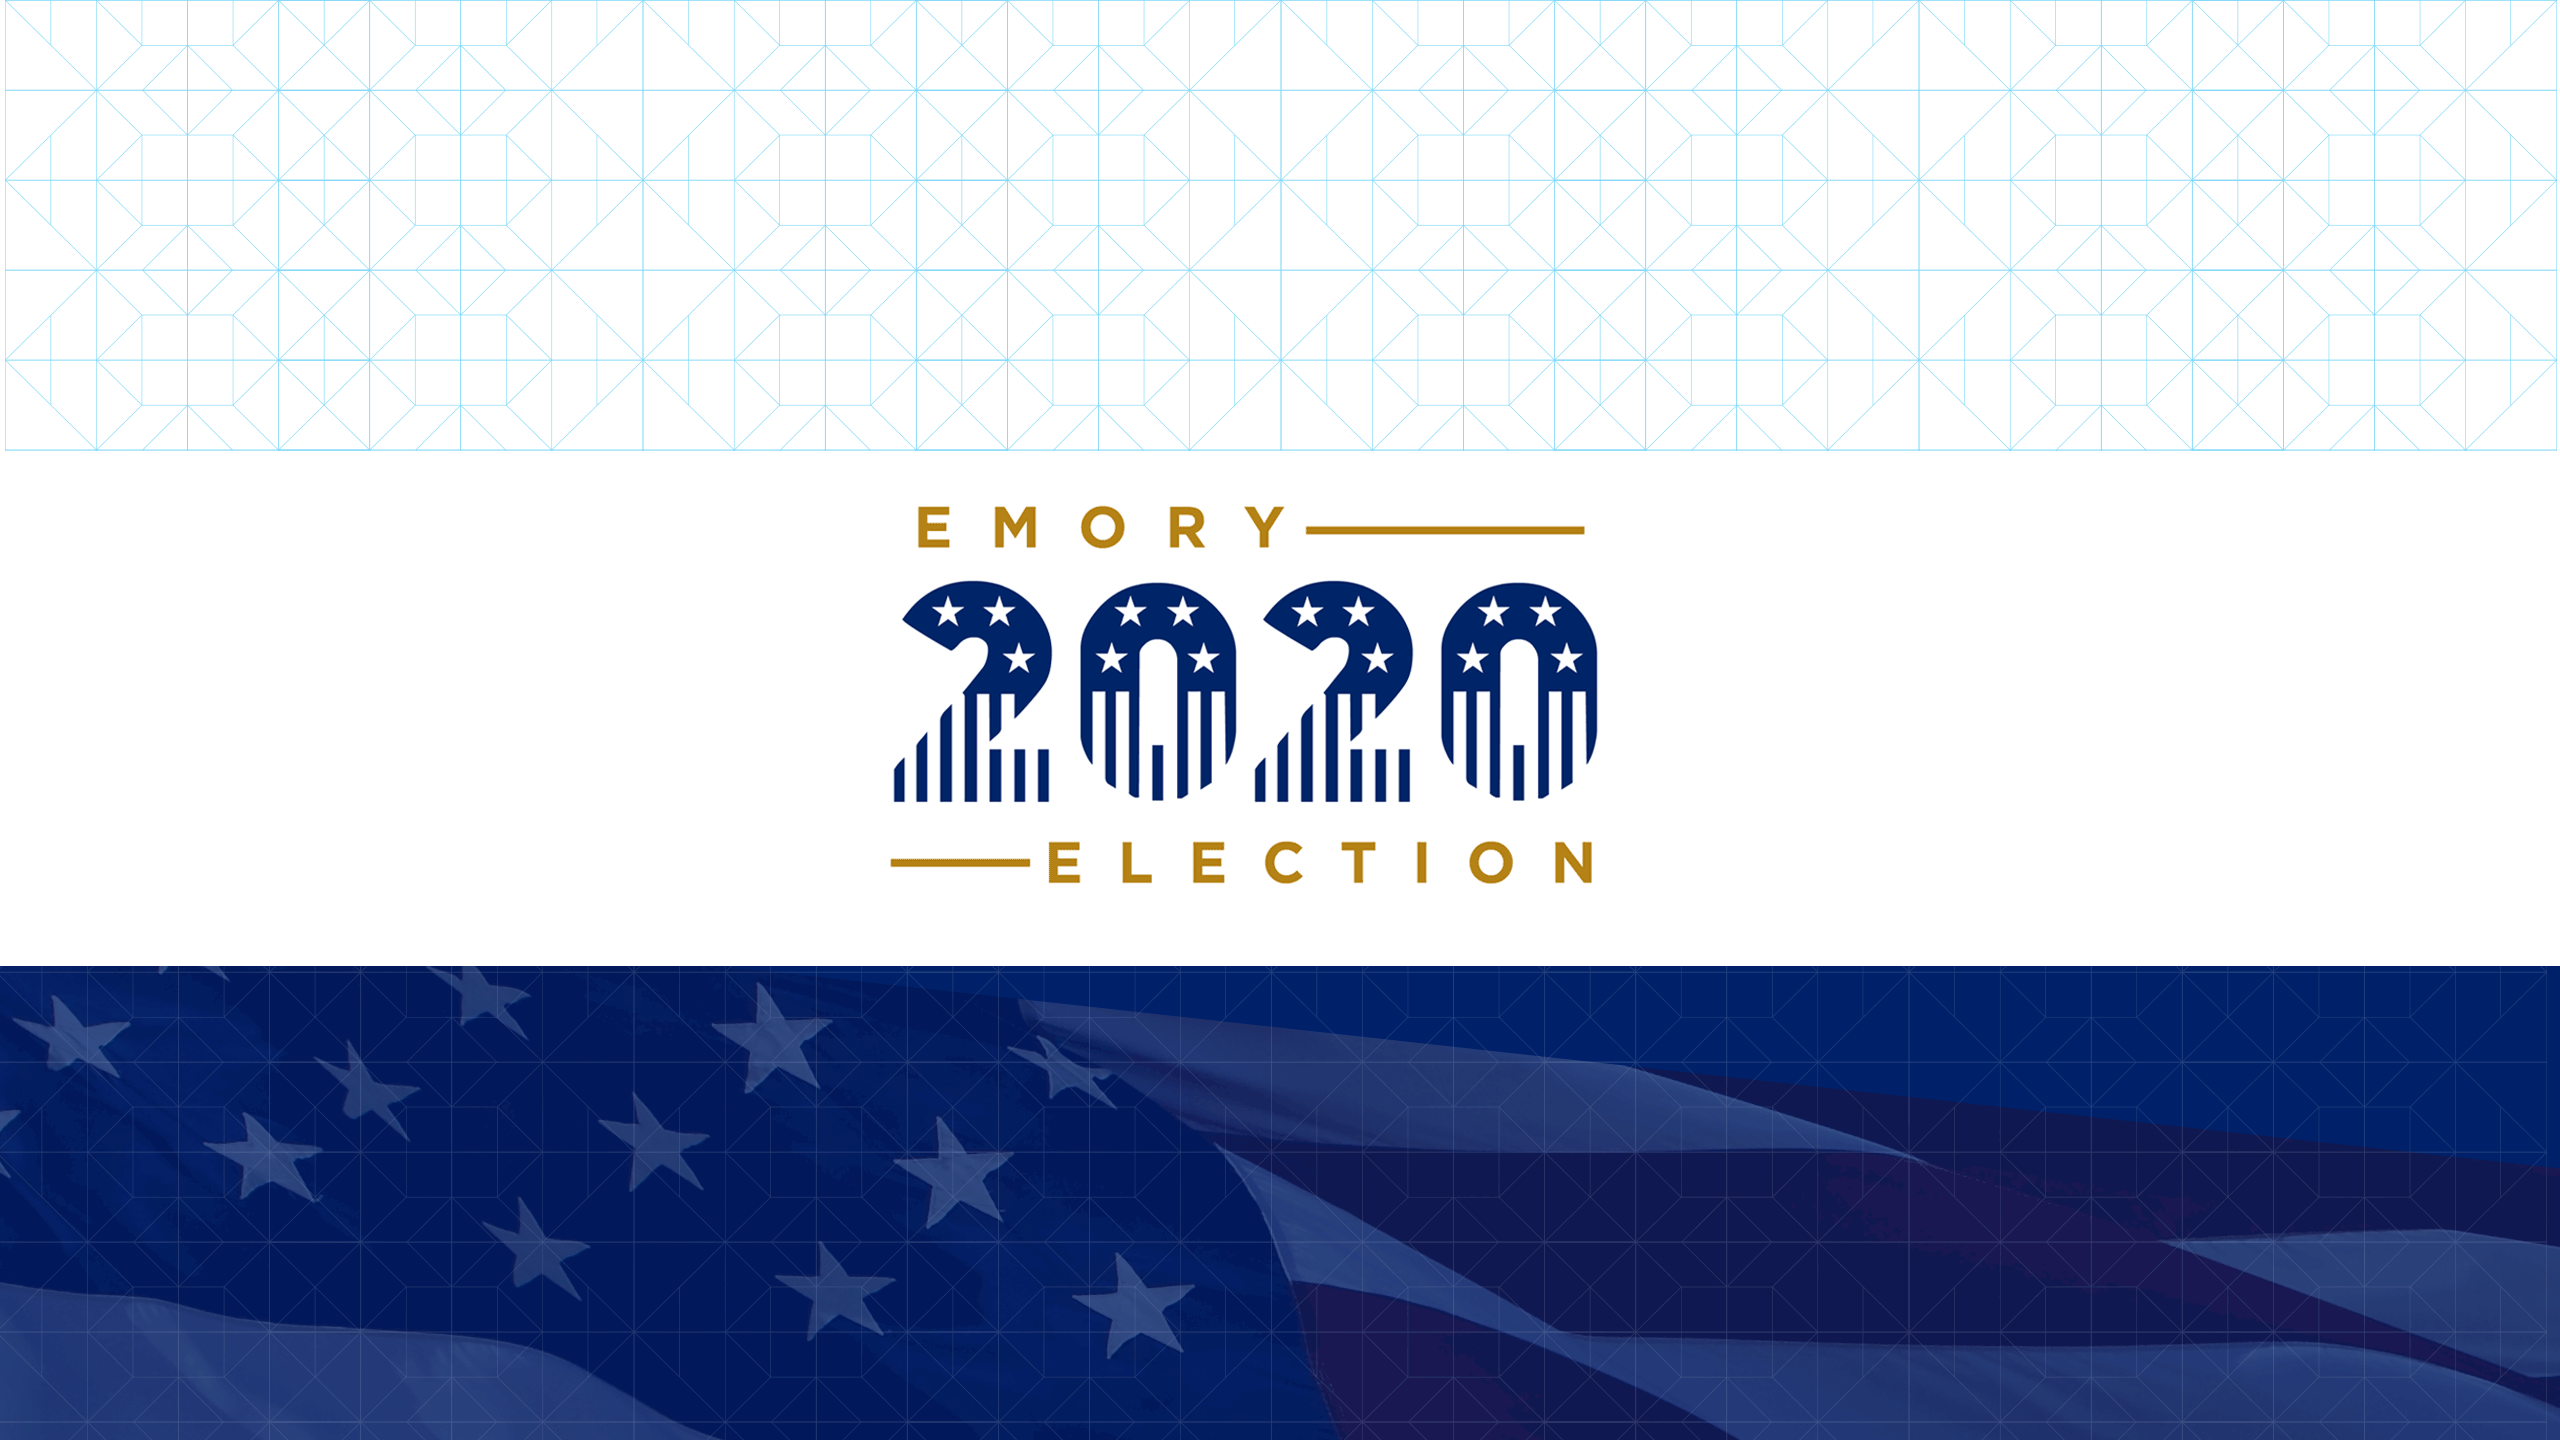 Emory Election 2020 event graphic